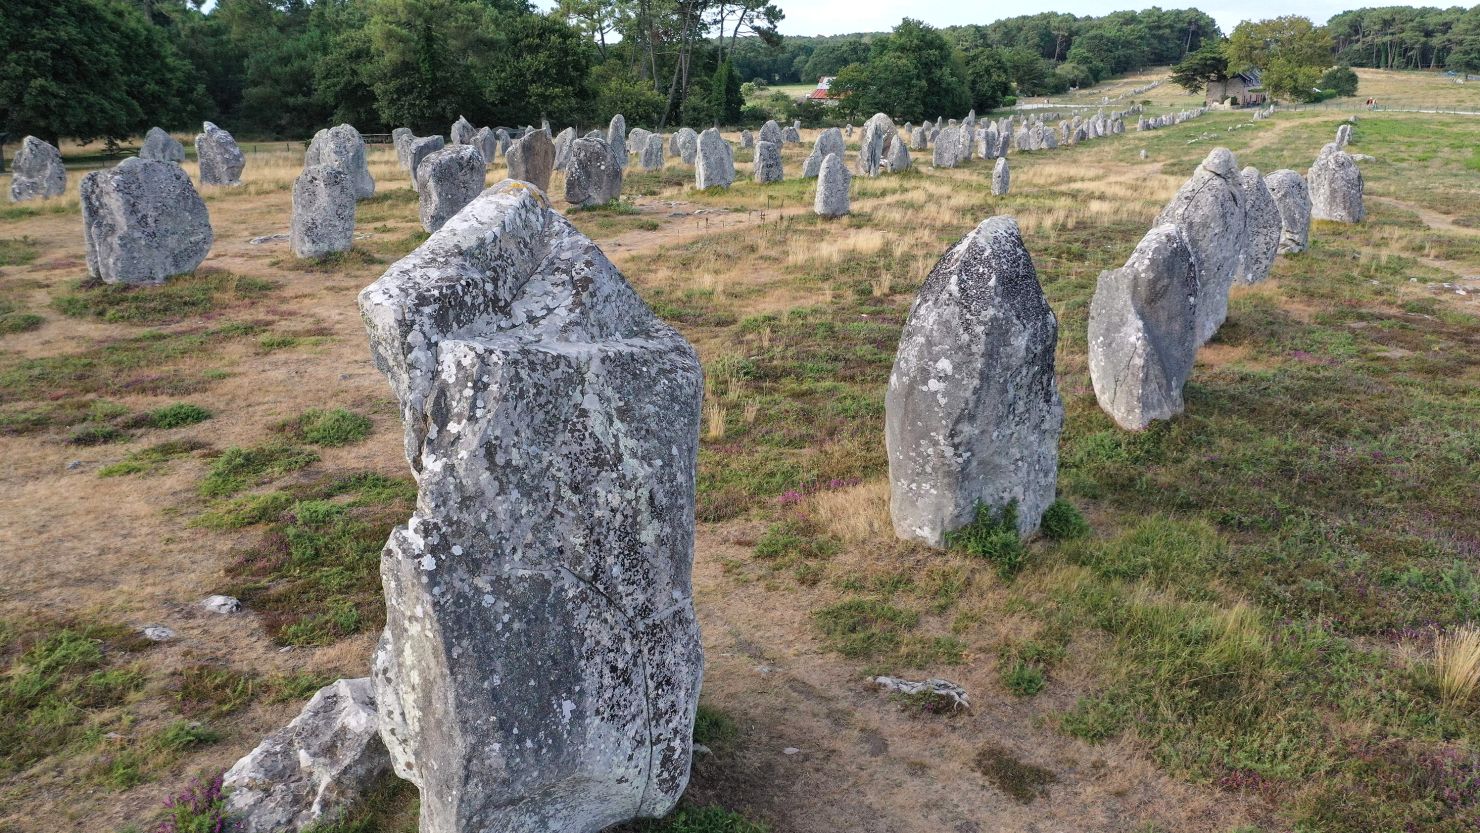 This aerial picture taken on August 4, 2019 shows the Carnac standing stones, a collection of Neolithic stones at a site in the city of Carnac, western France.